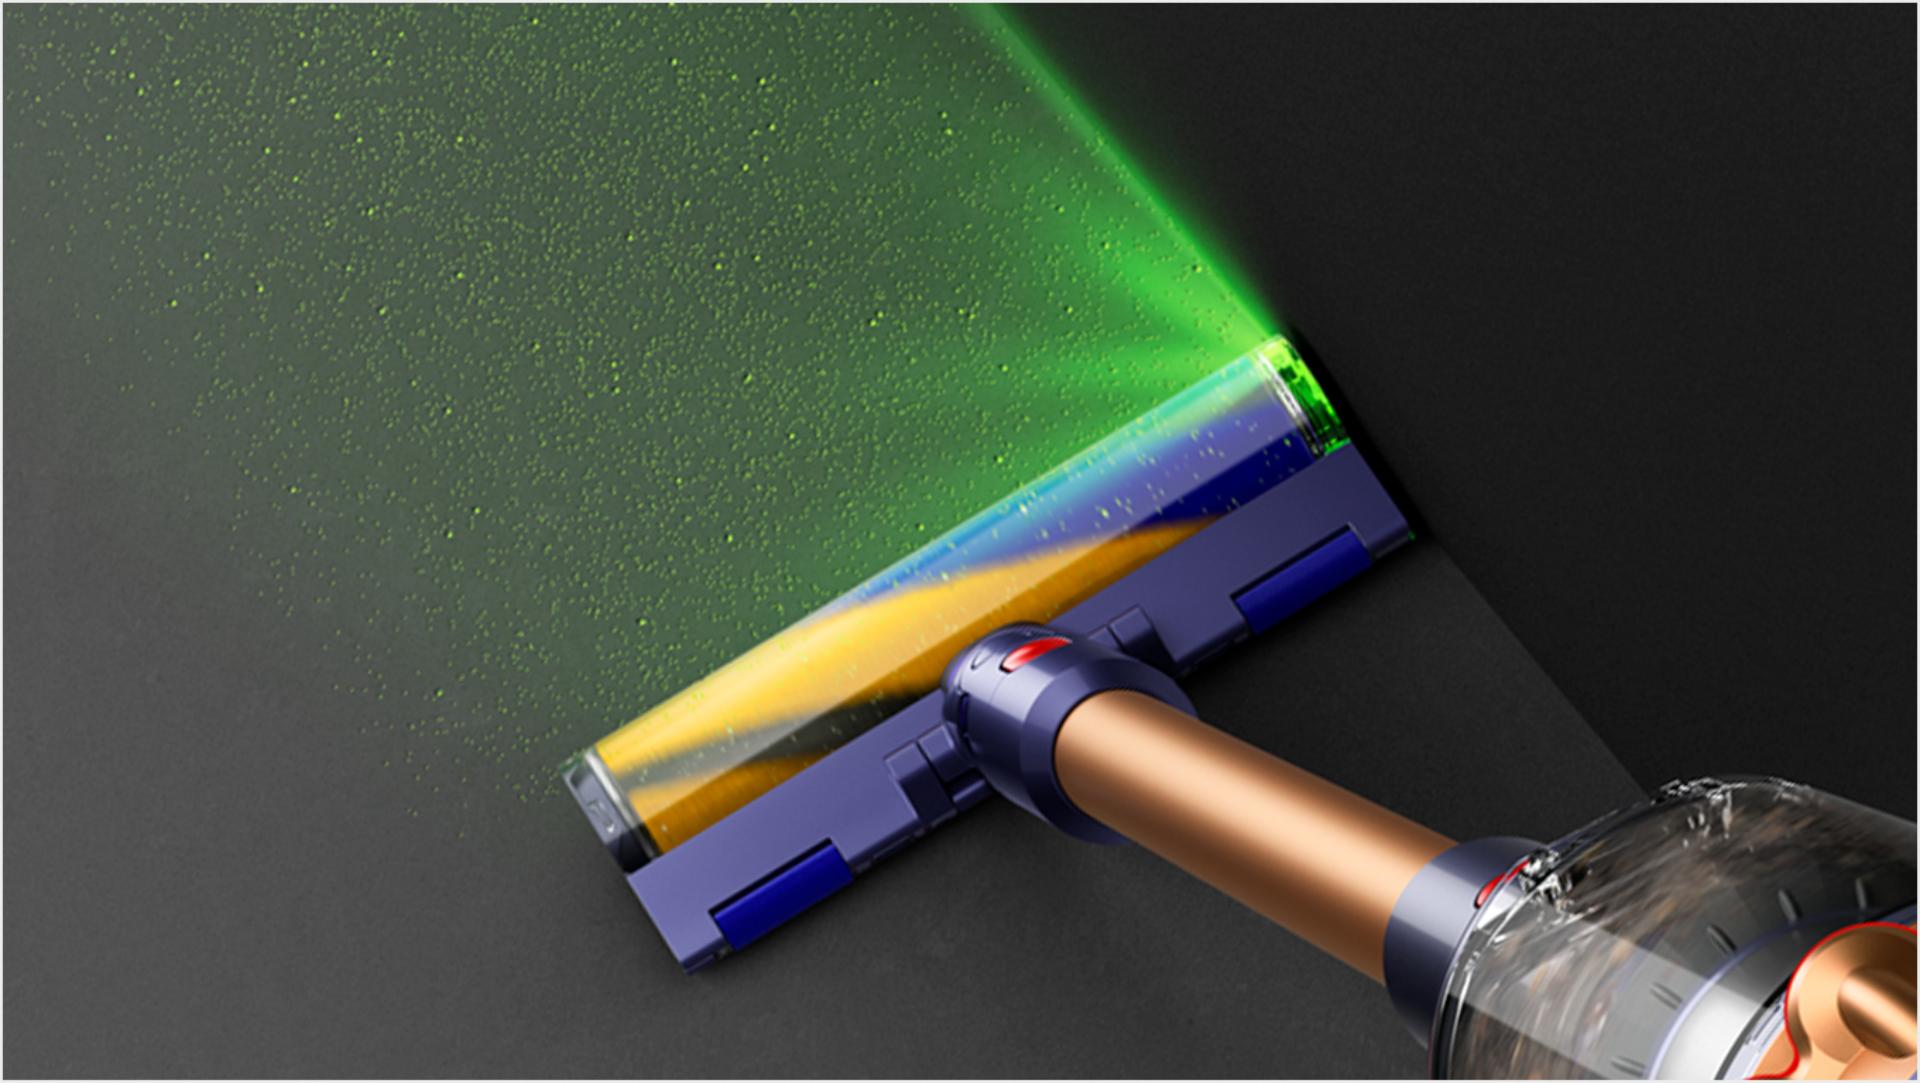 Profile of the green blade of light emitting from the Fluffy Optic cleaner head.